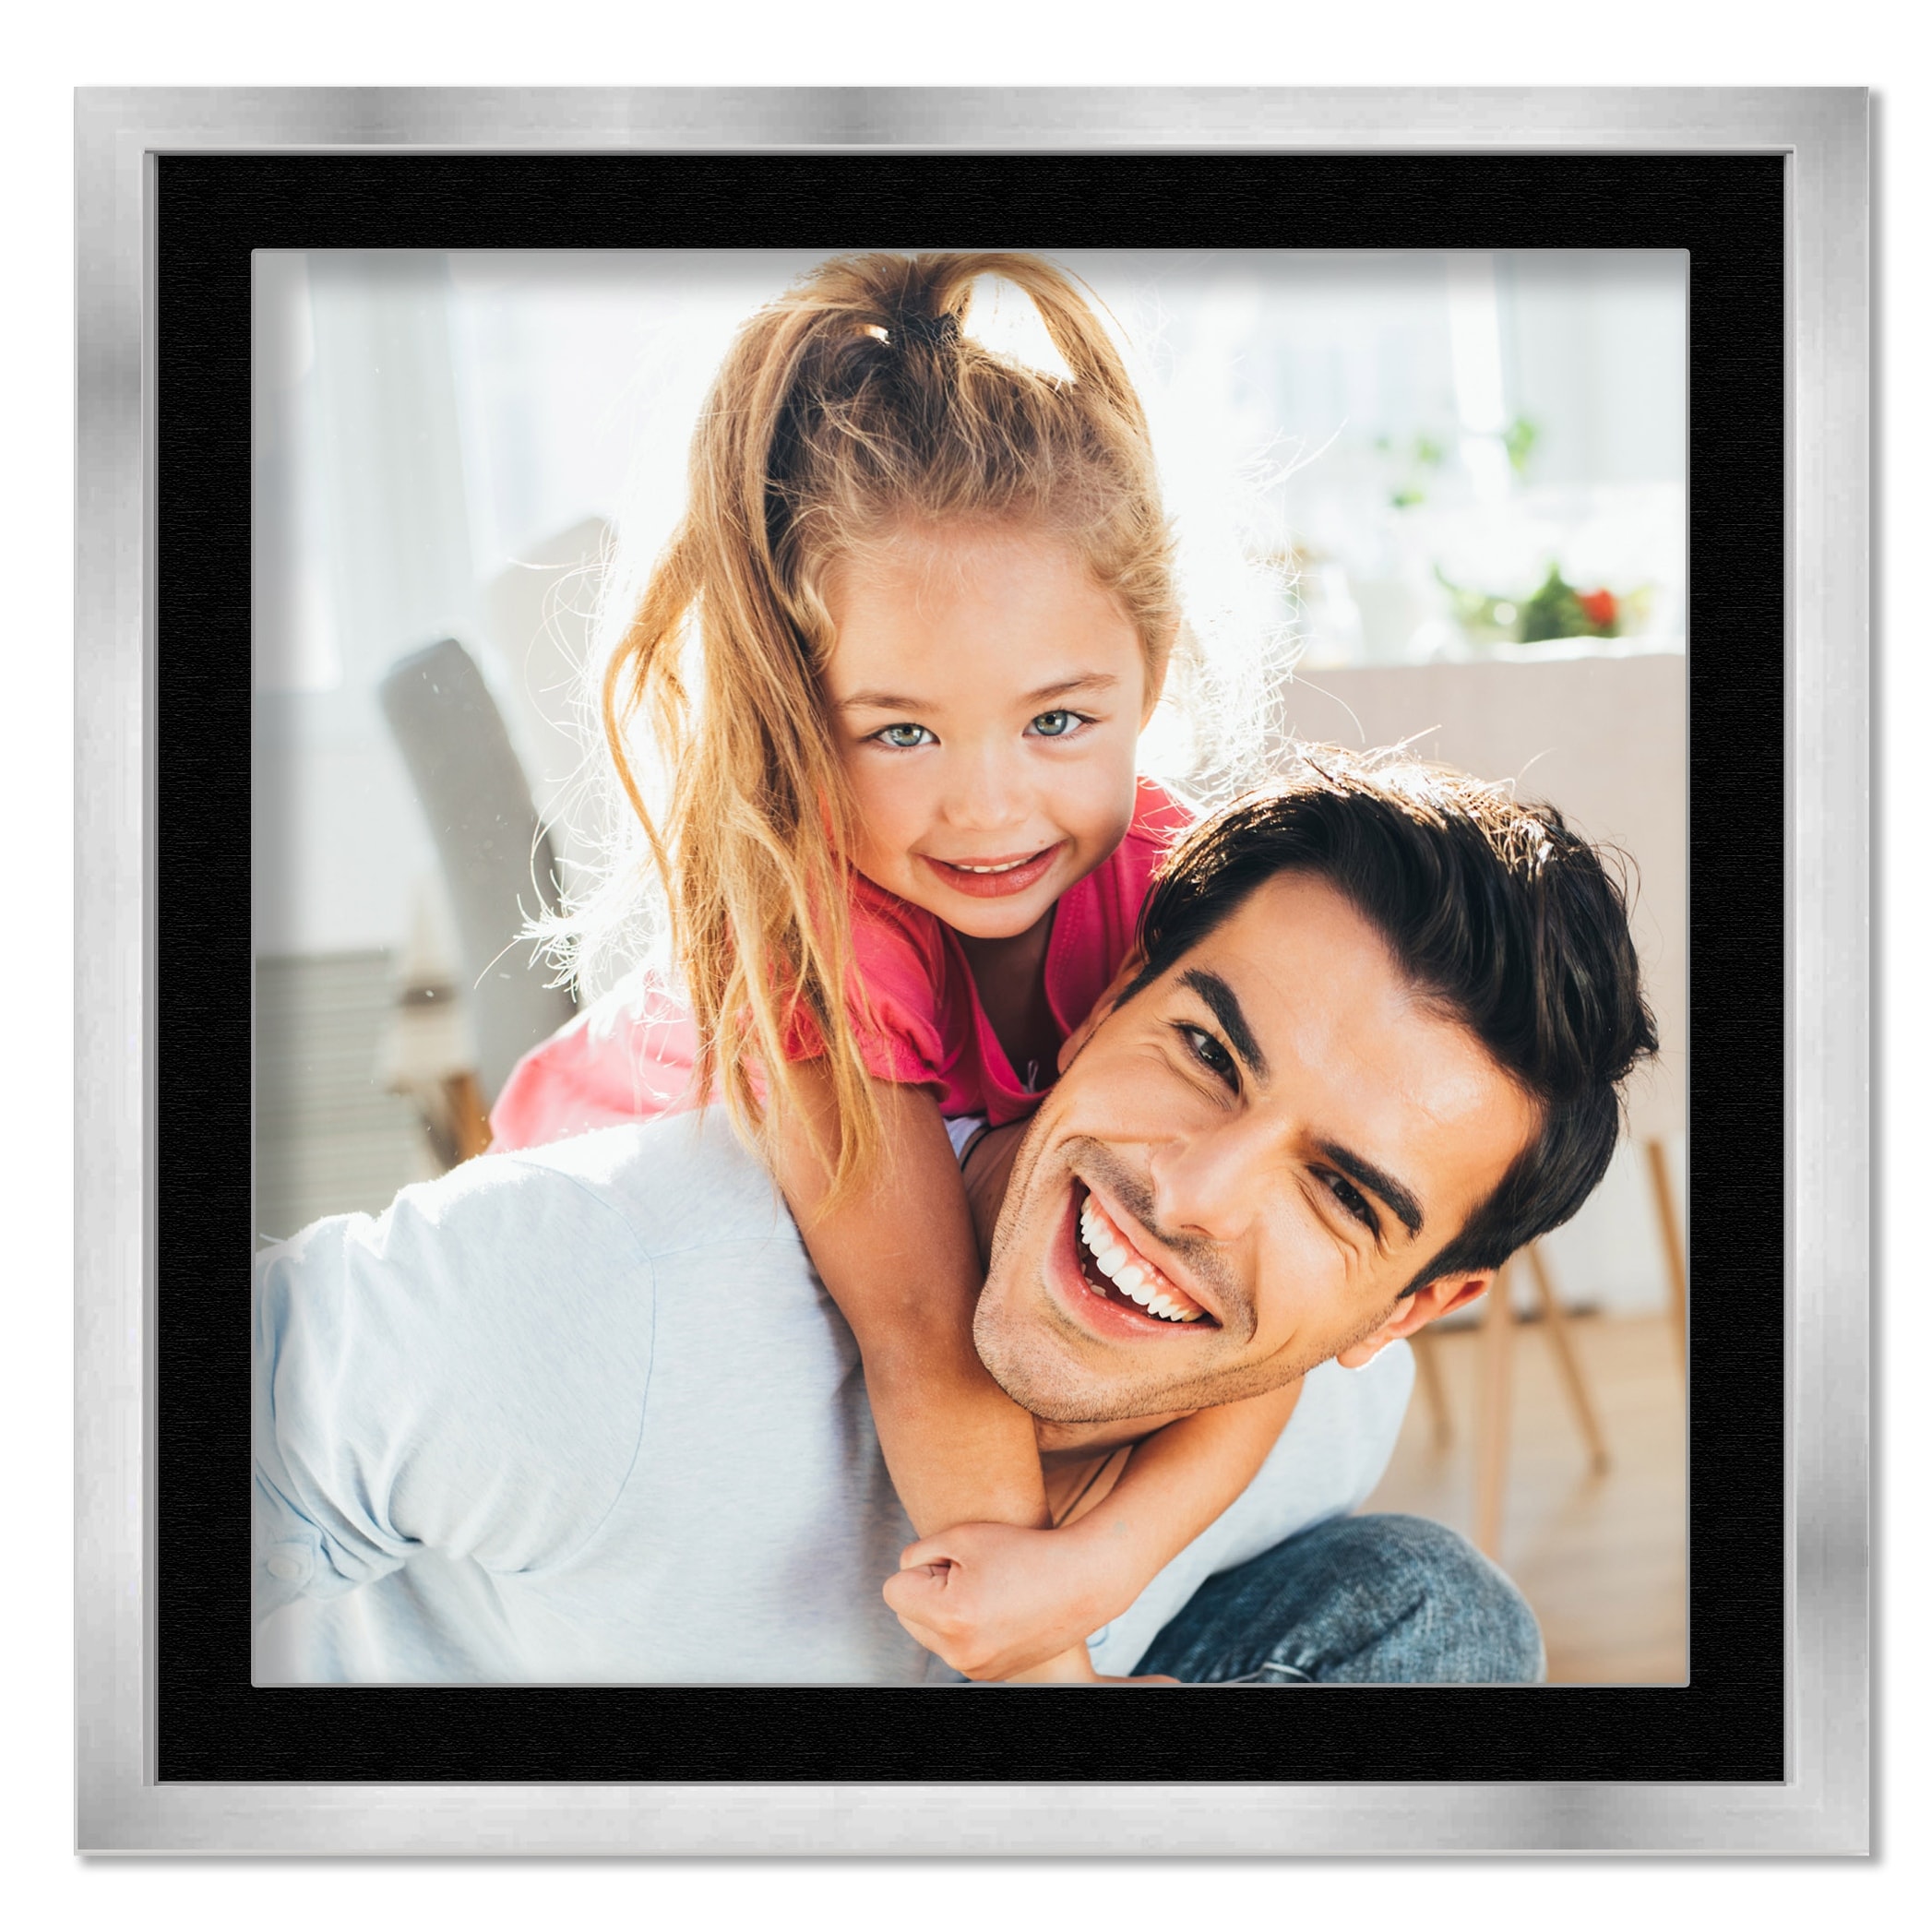 20x20 Frame with Mat - Black 22x22 Frame Wood Made to Display Print or  Poster Measuring 20 x 20 Inches with Black Photo Mat